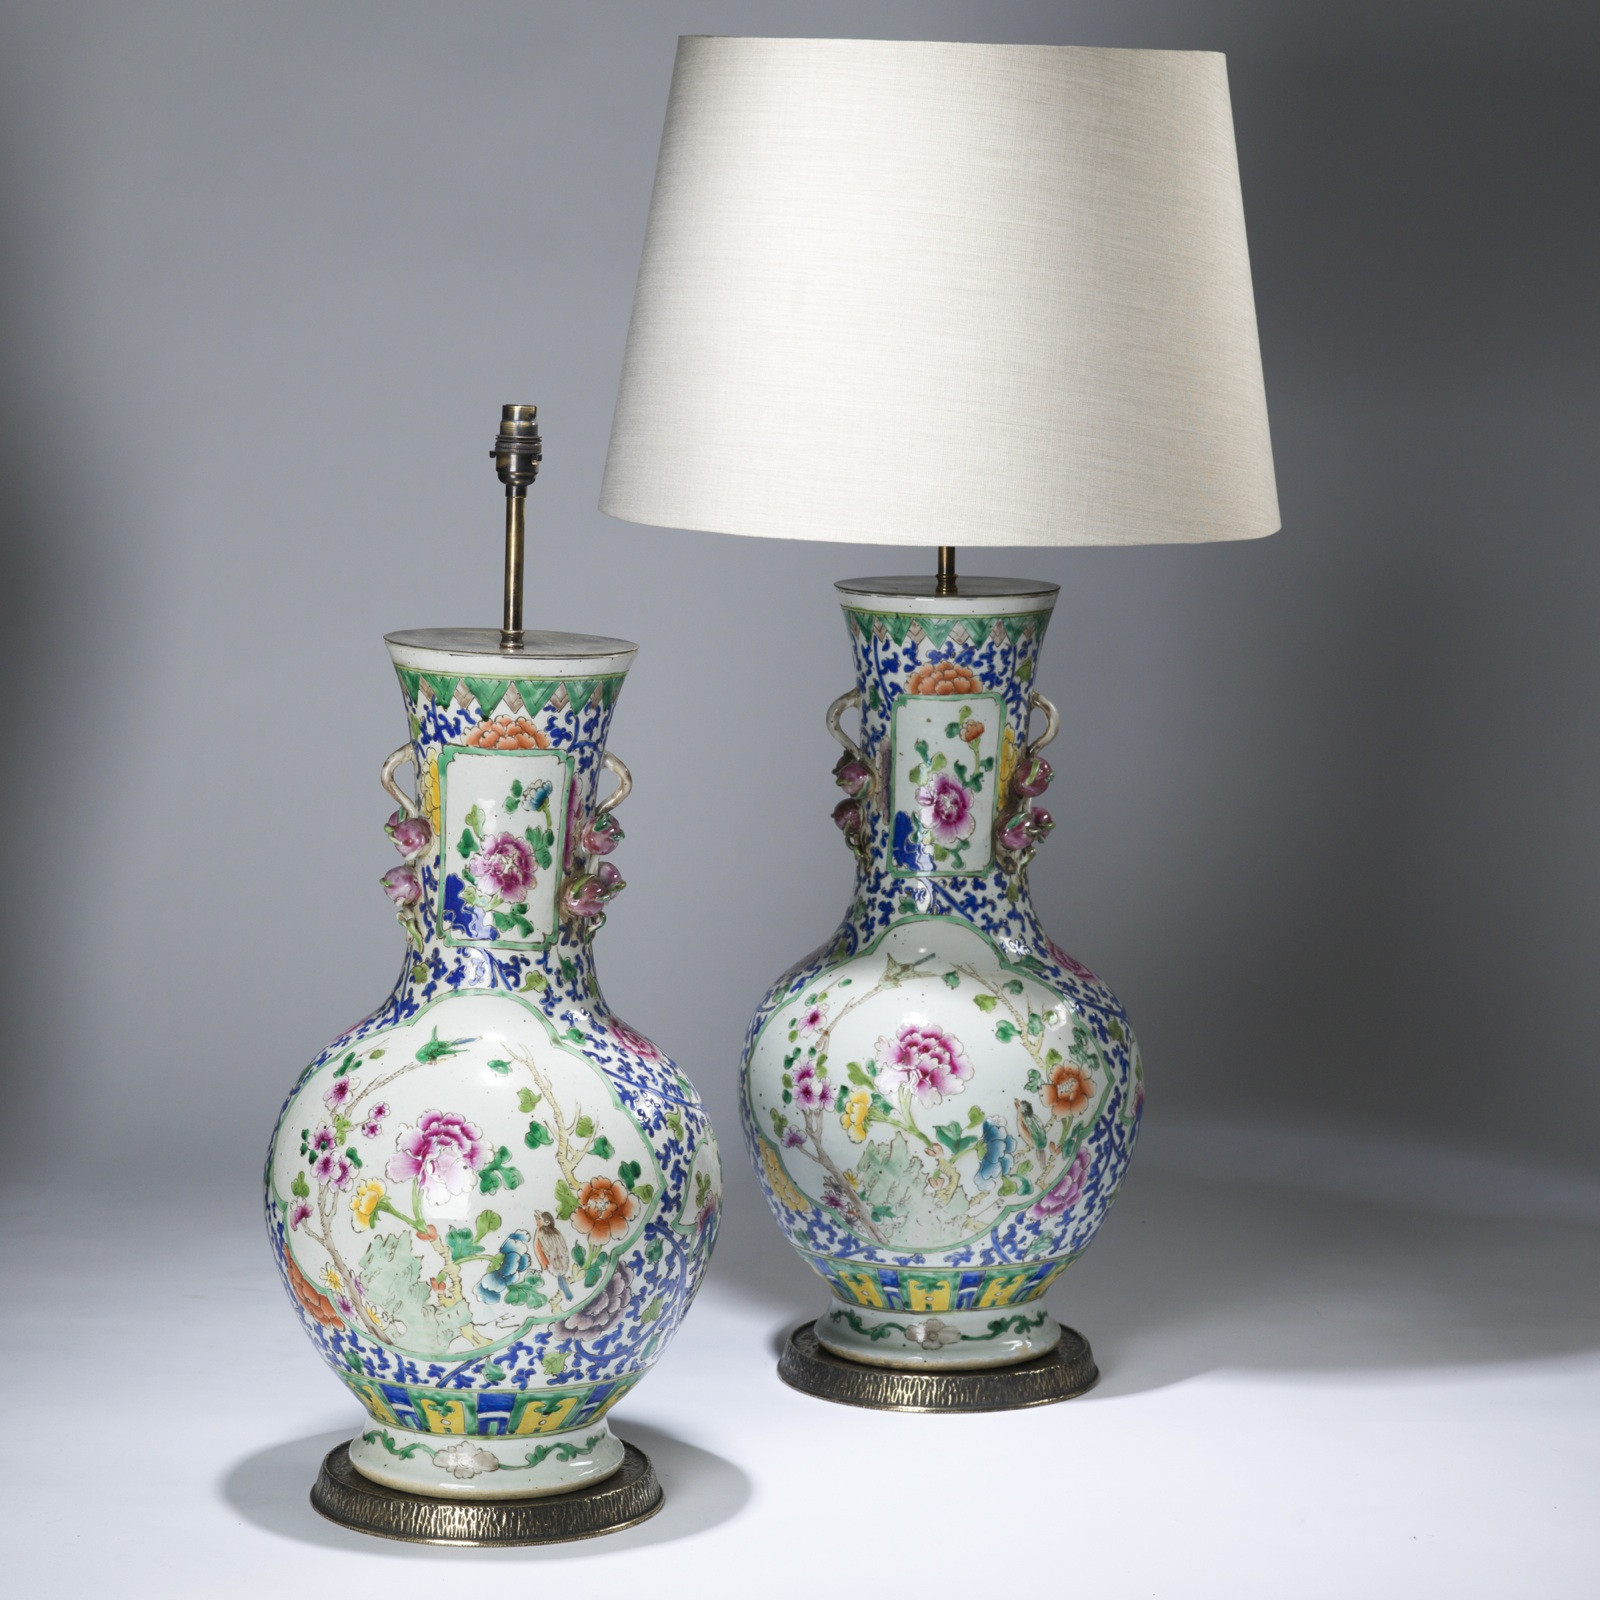 14 Popular Antique Porcelain Vases 2024 free download antique porcelain vases of 33 unique porcelin table lamps creative lighting ideas for home in vases chinese vase lamps pair old vintage japanese blue white lotus inspiration chinese table la